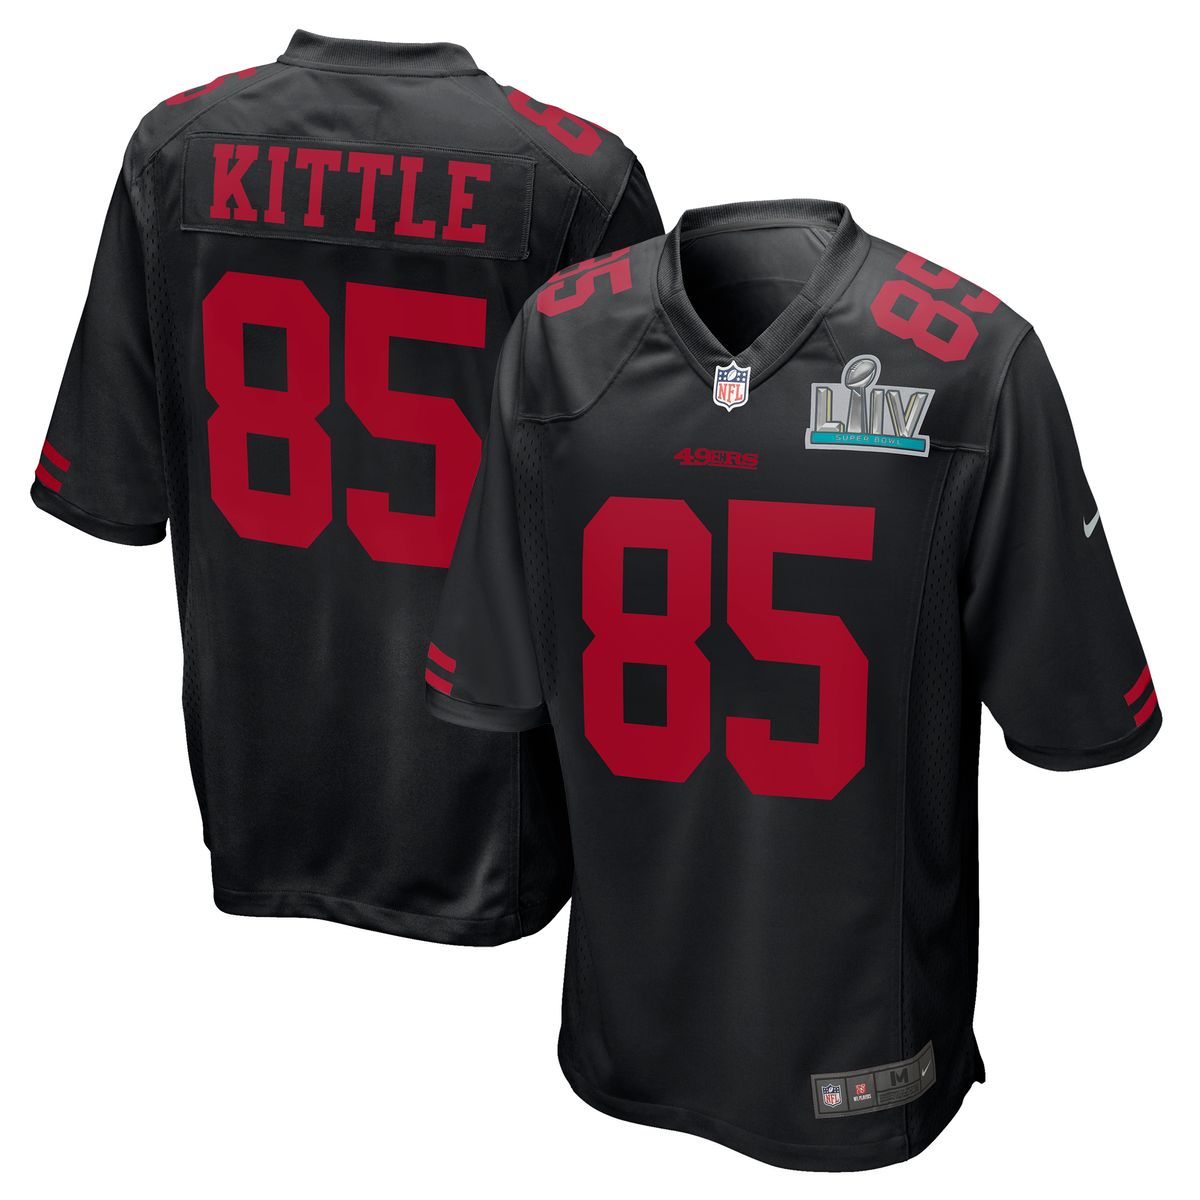 49ers jersey colors